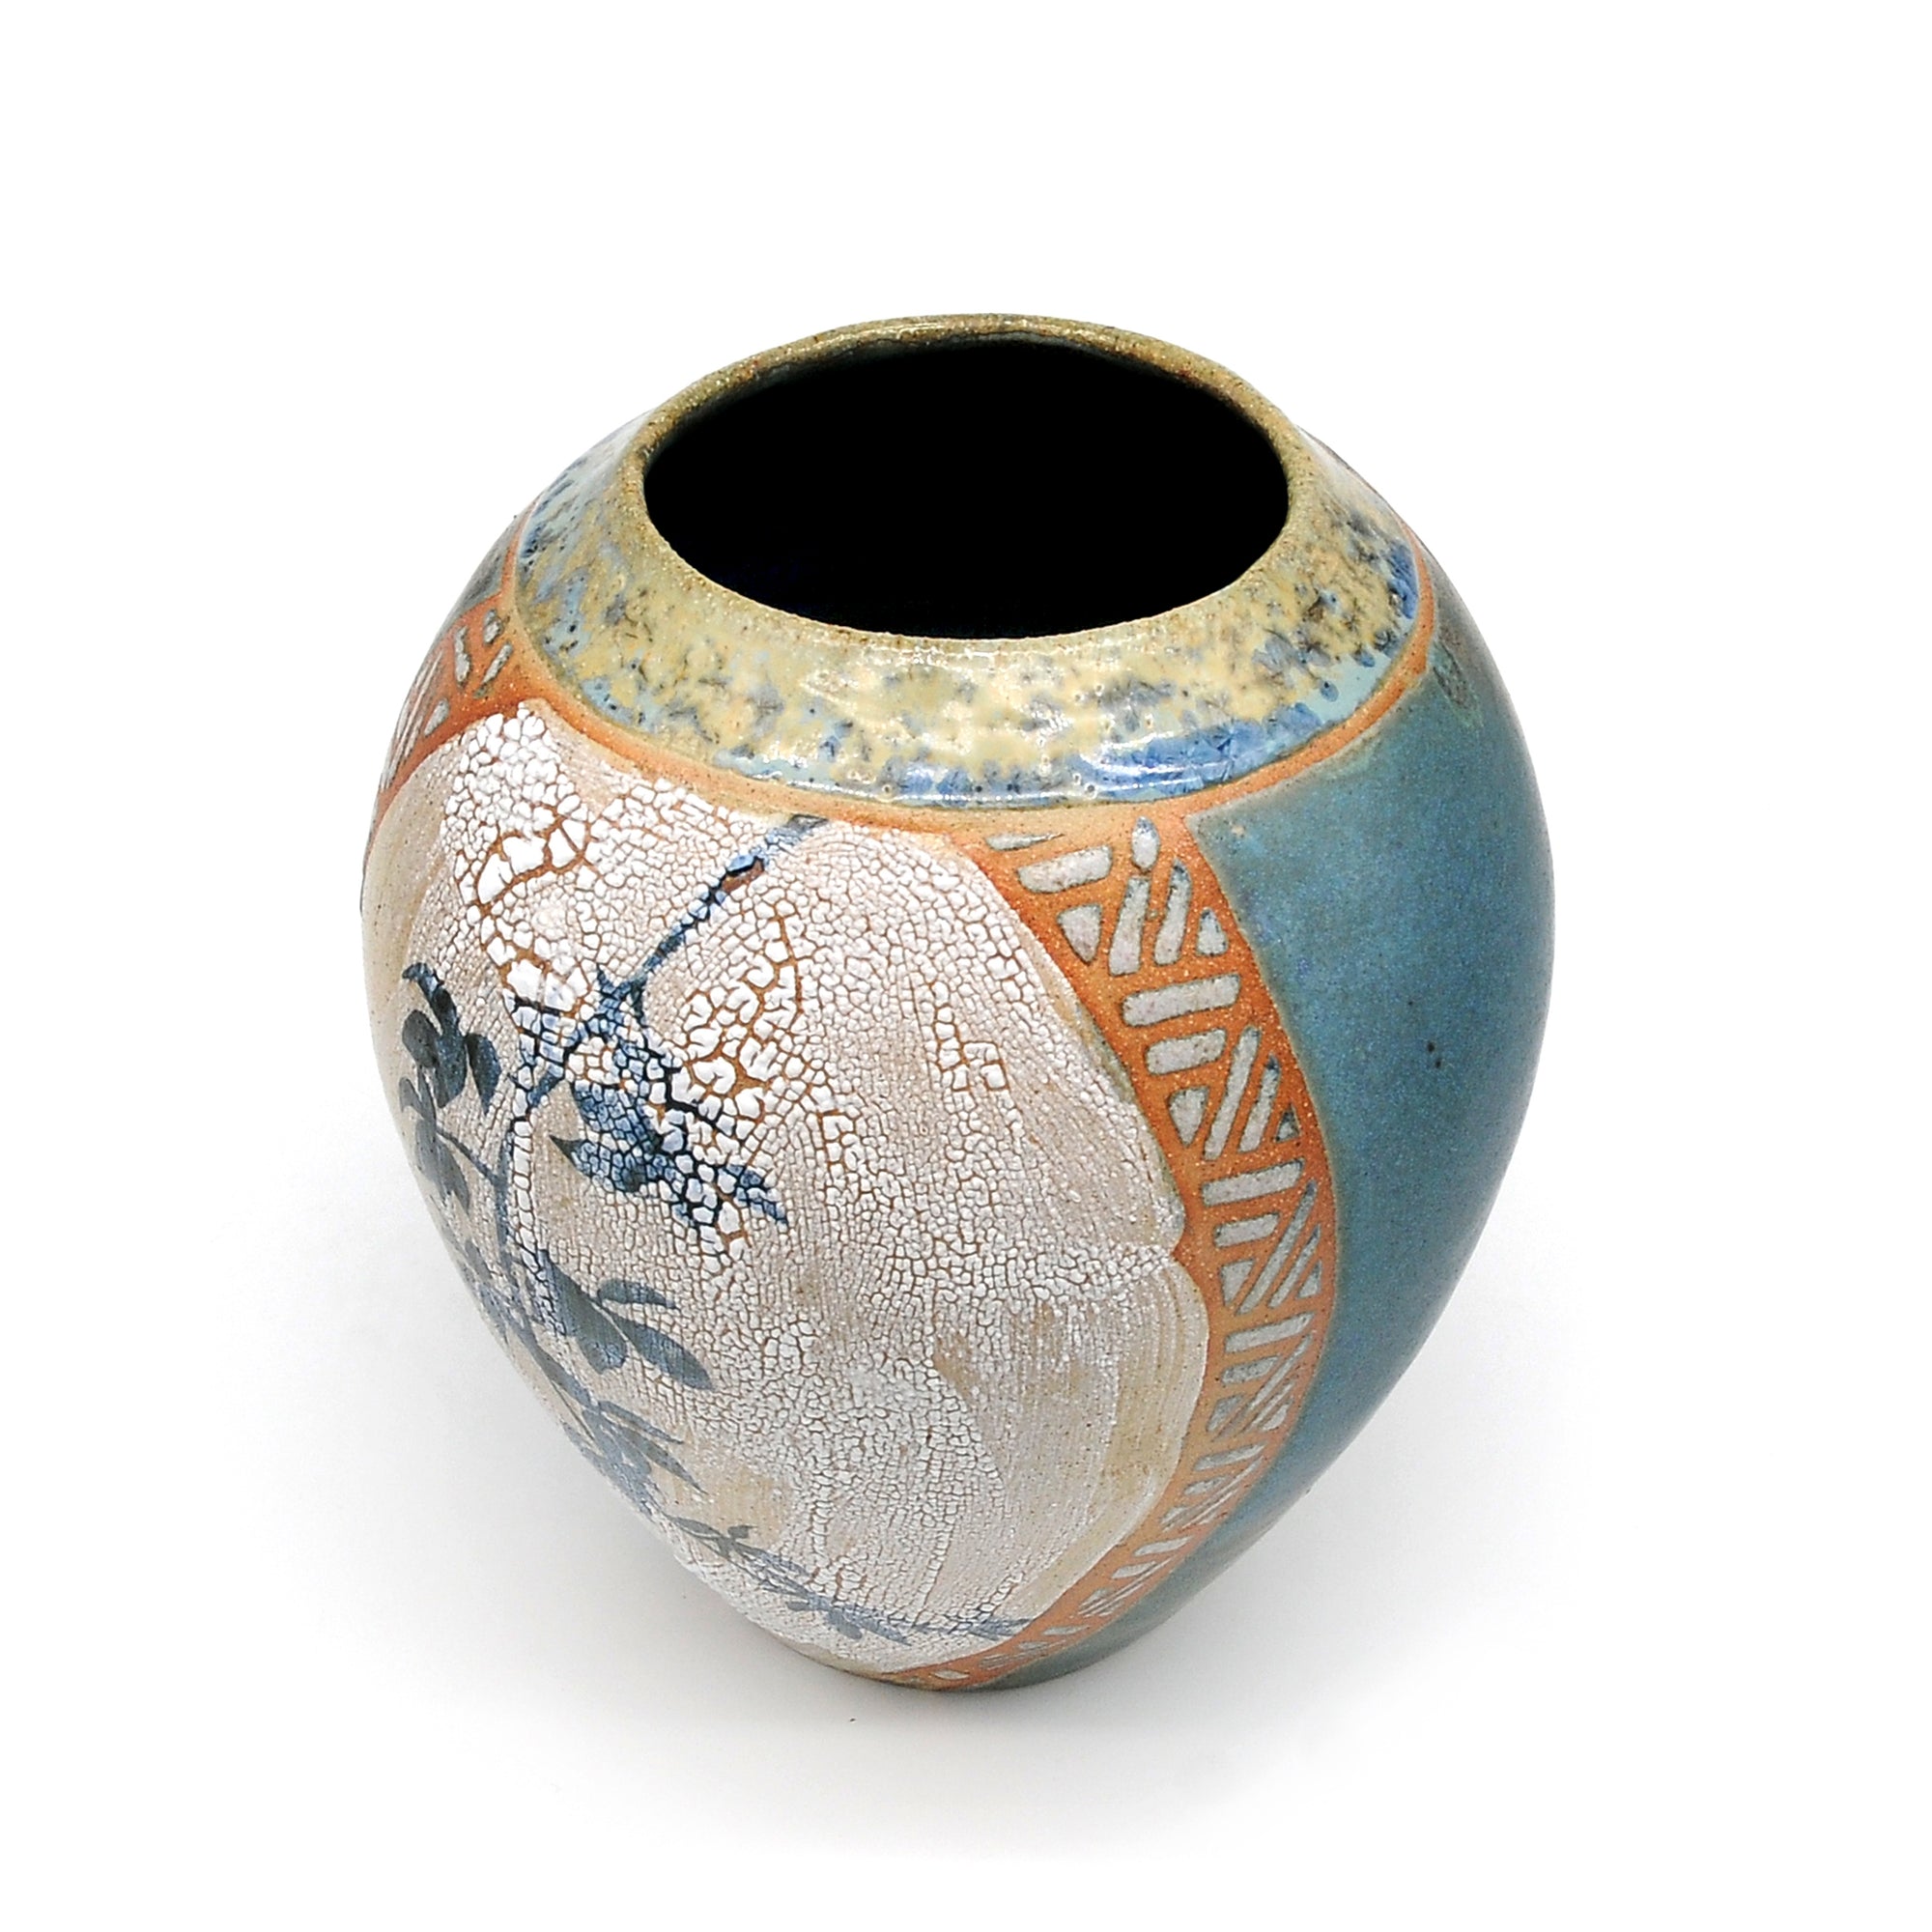 MK22 Vase by Miae Kim available at Padstow Gallery, Cornwall